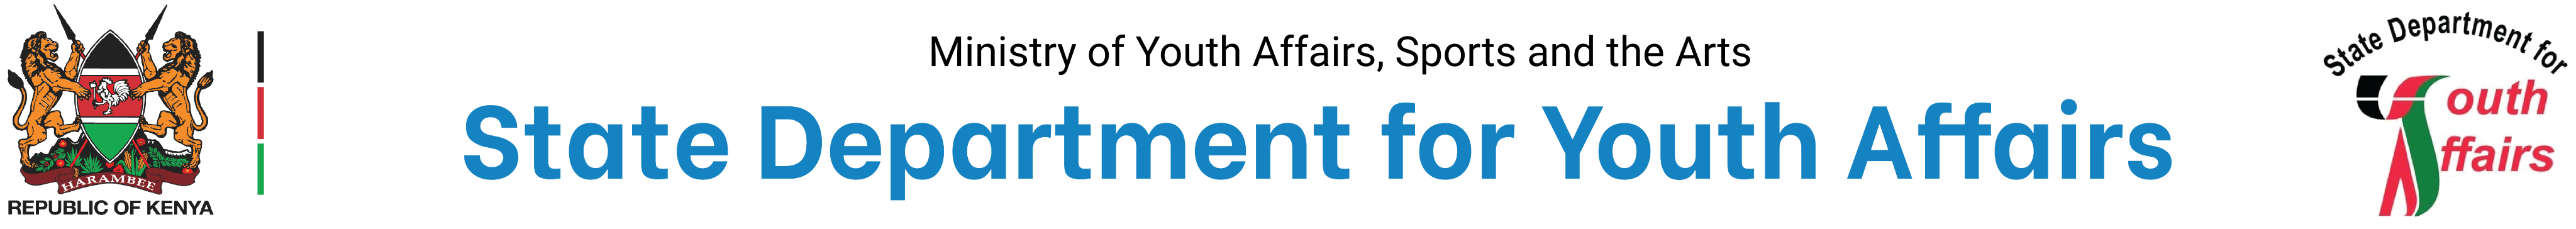 State Department for Youth Affairs and the Arts Logo